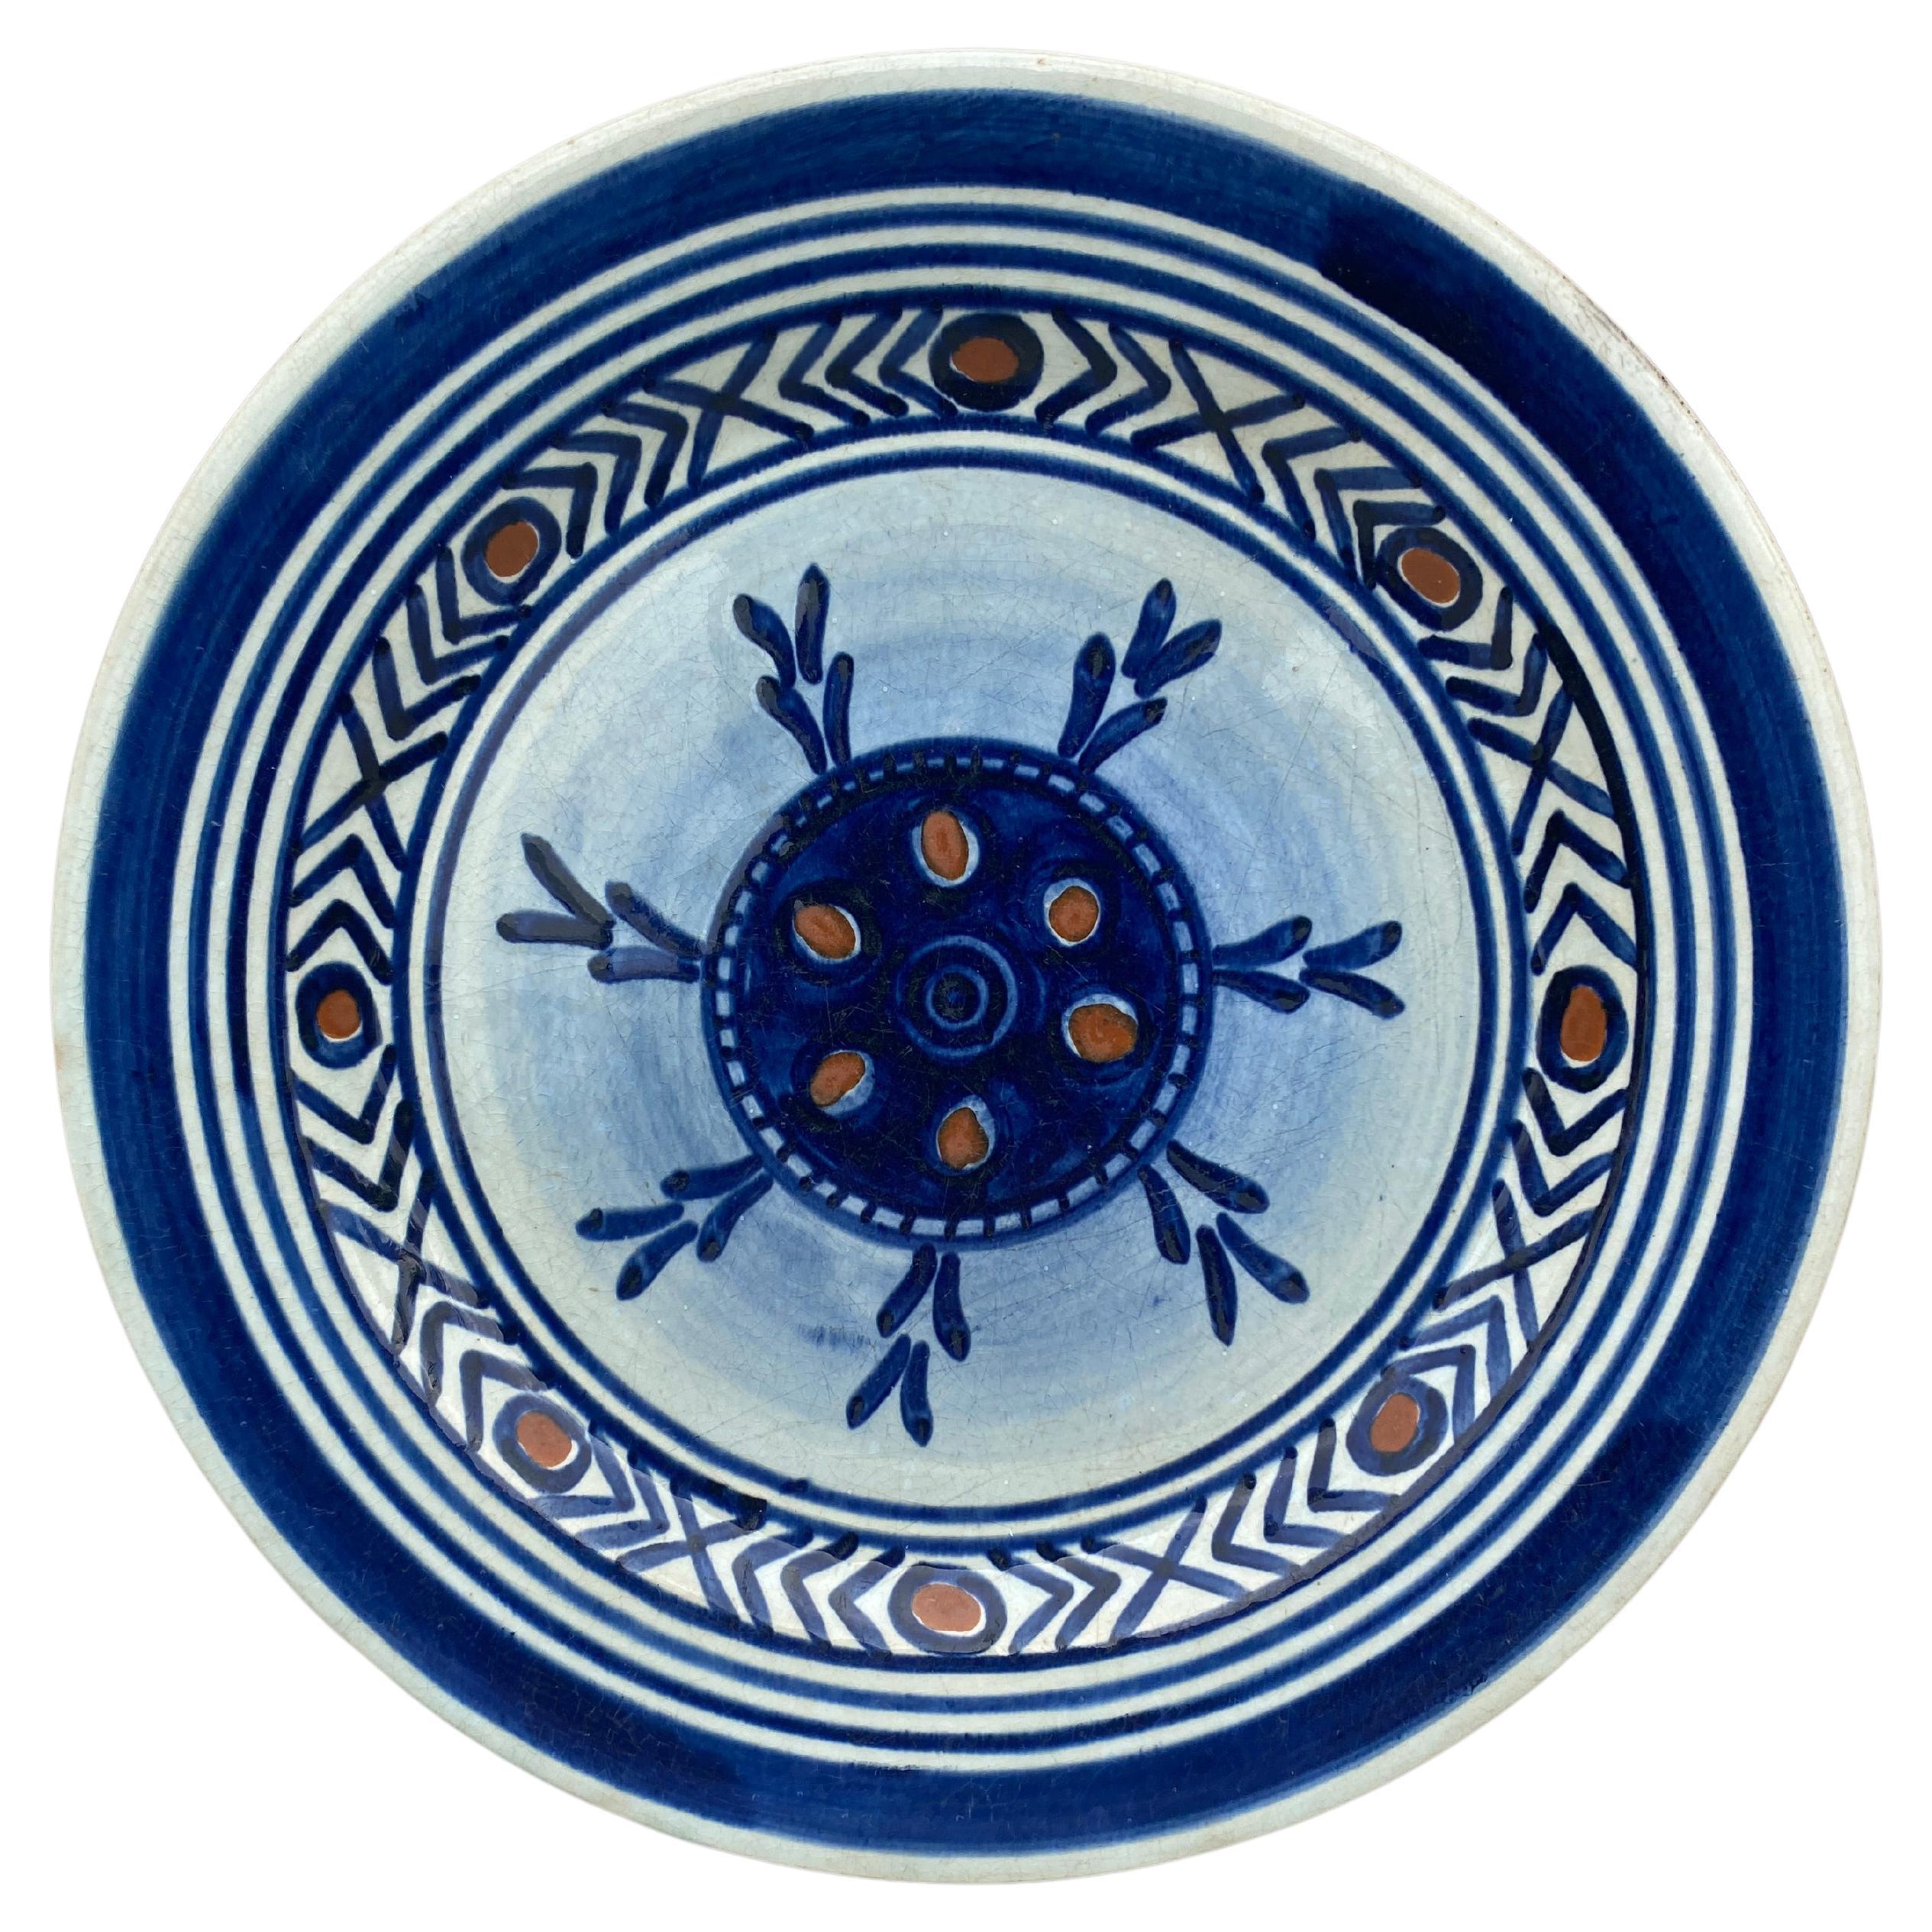 French Faience Blue & White Plate Gien